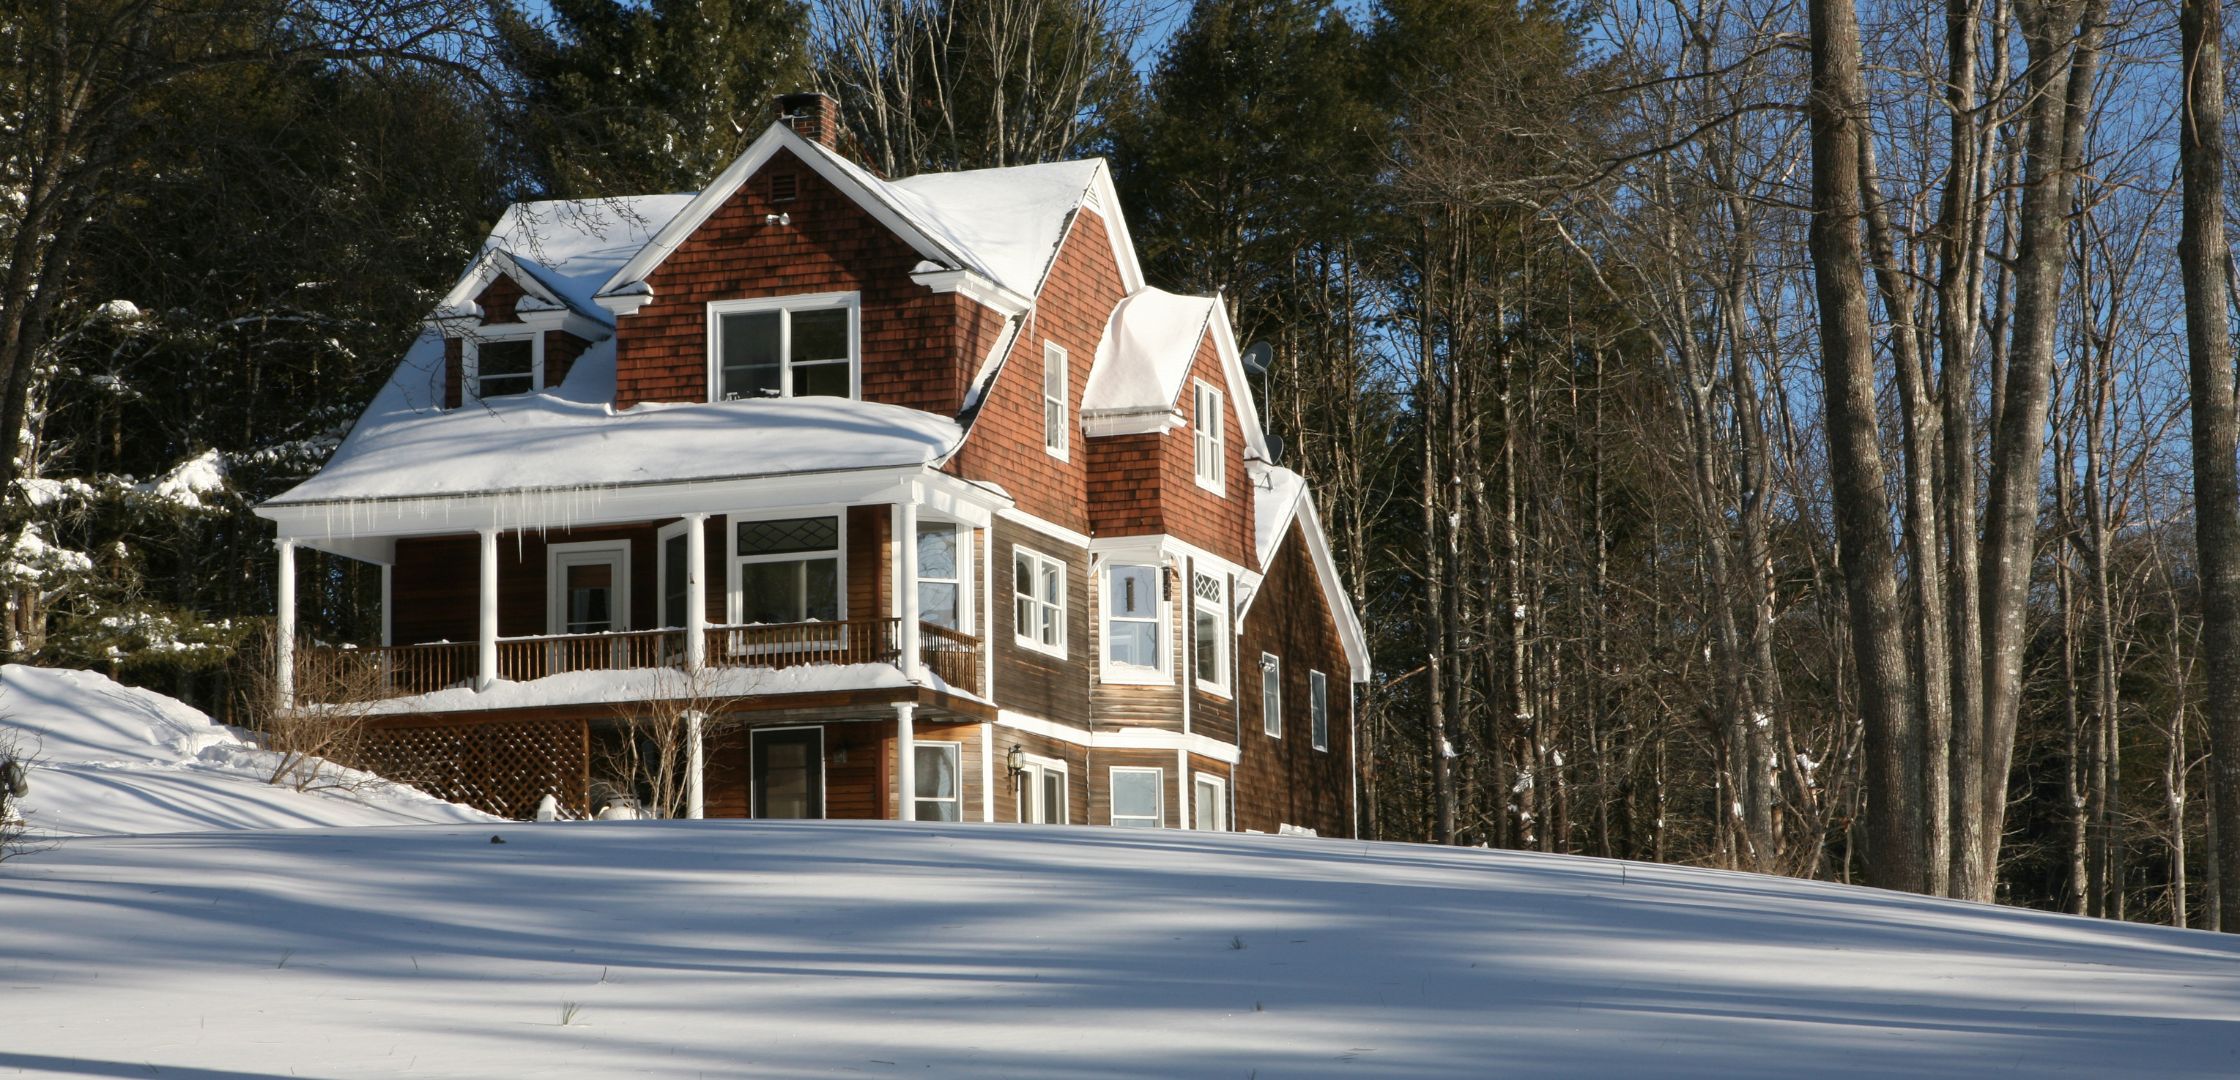 A large house in the forest is covered in a thick blanket of snow, with a yard full of snow surrounding it.